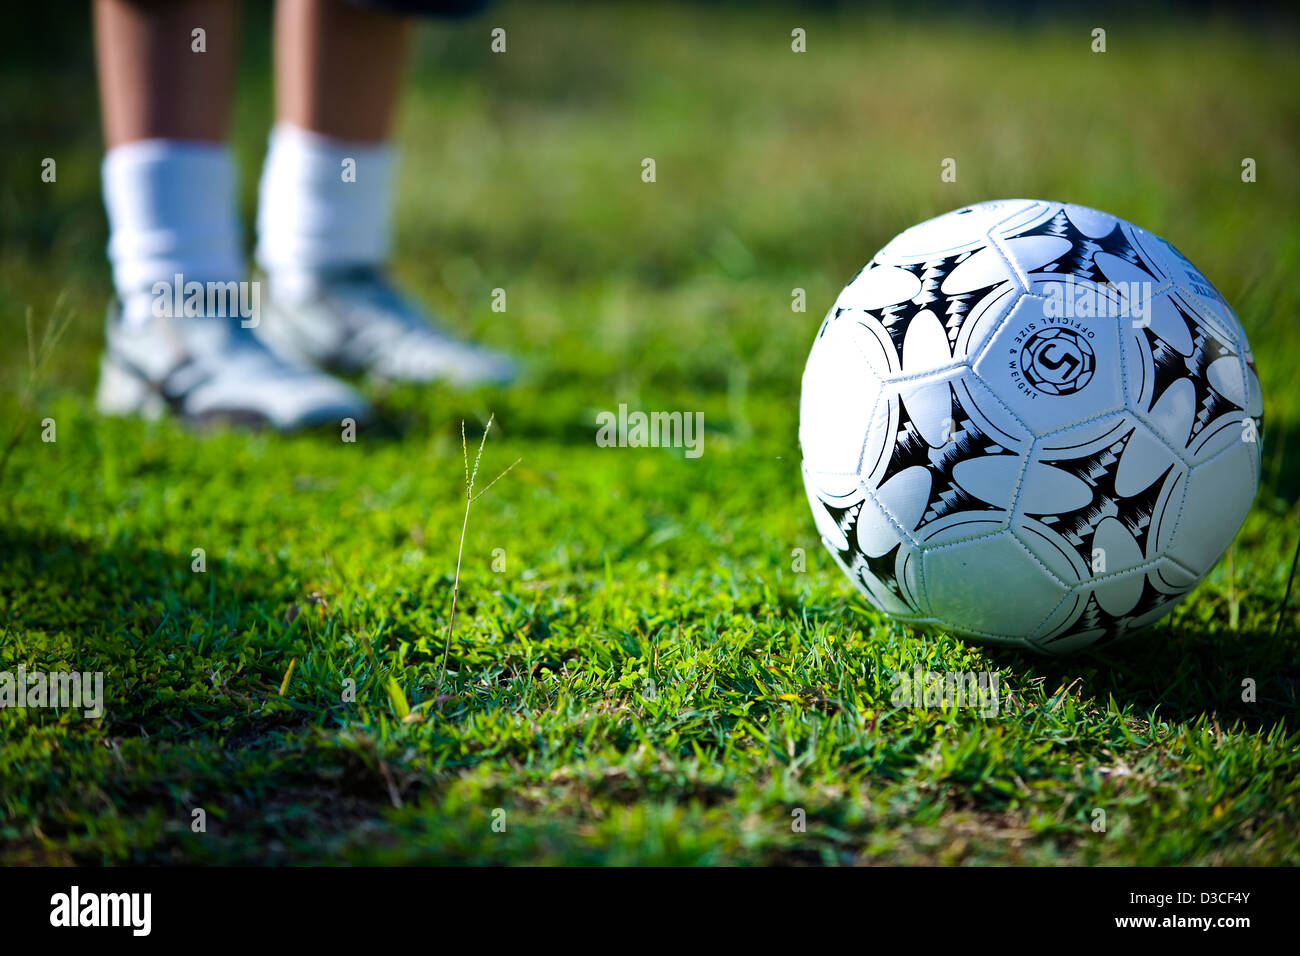 Sports field with ground level image of a football and person in background Stock Photo